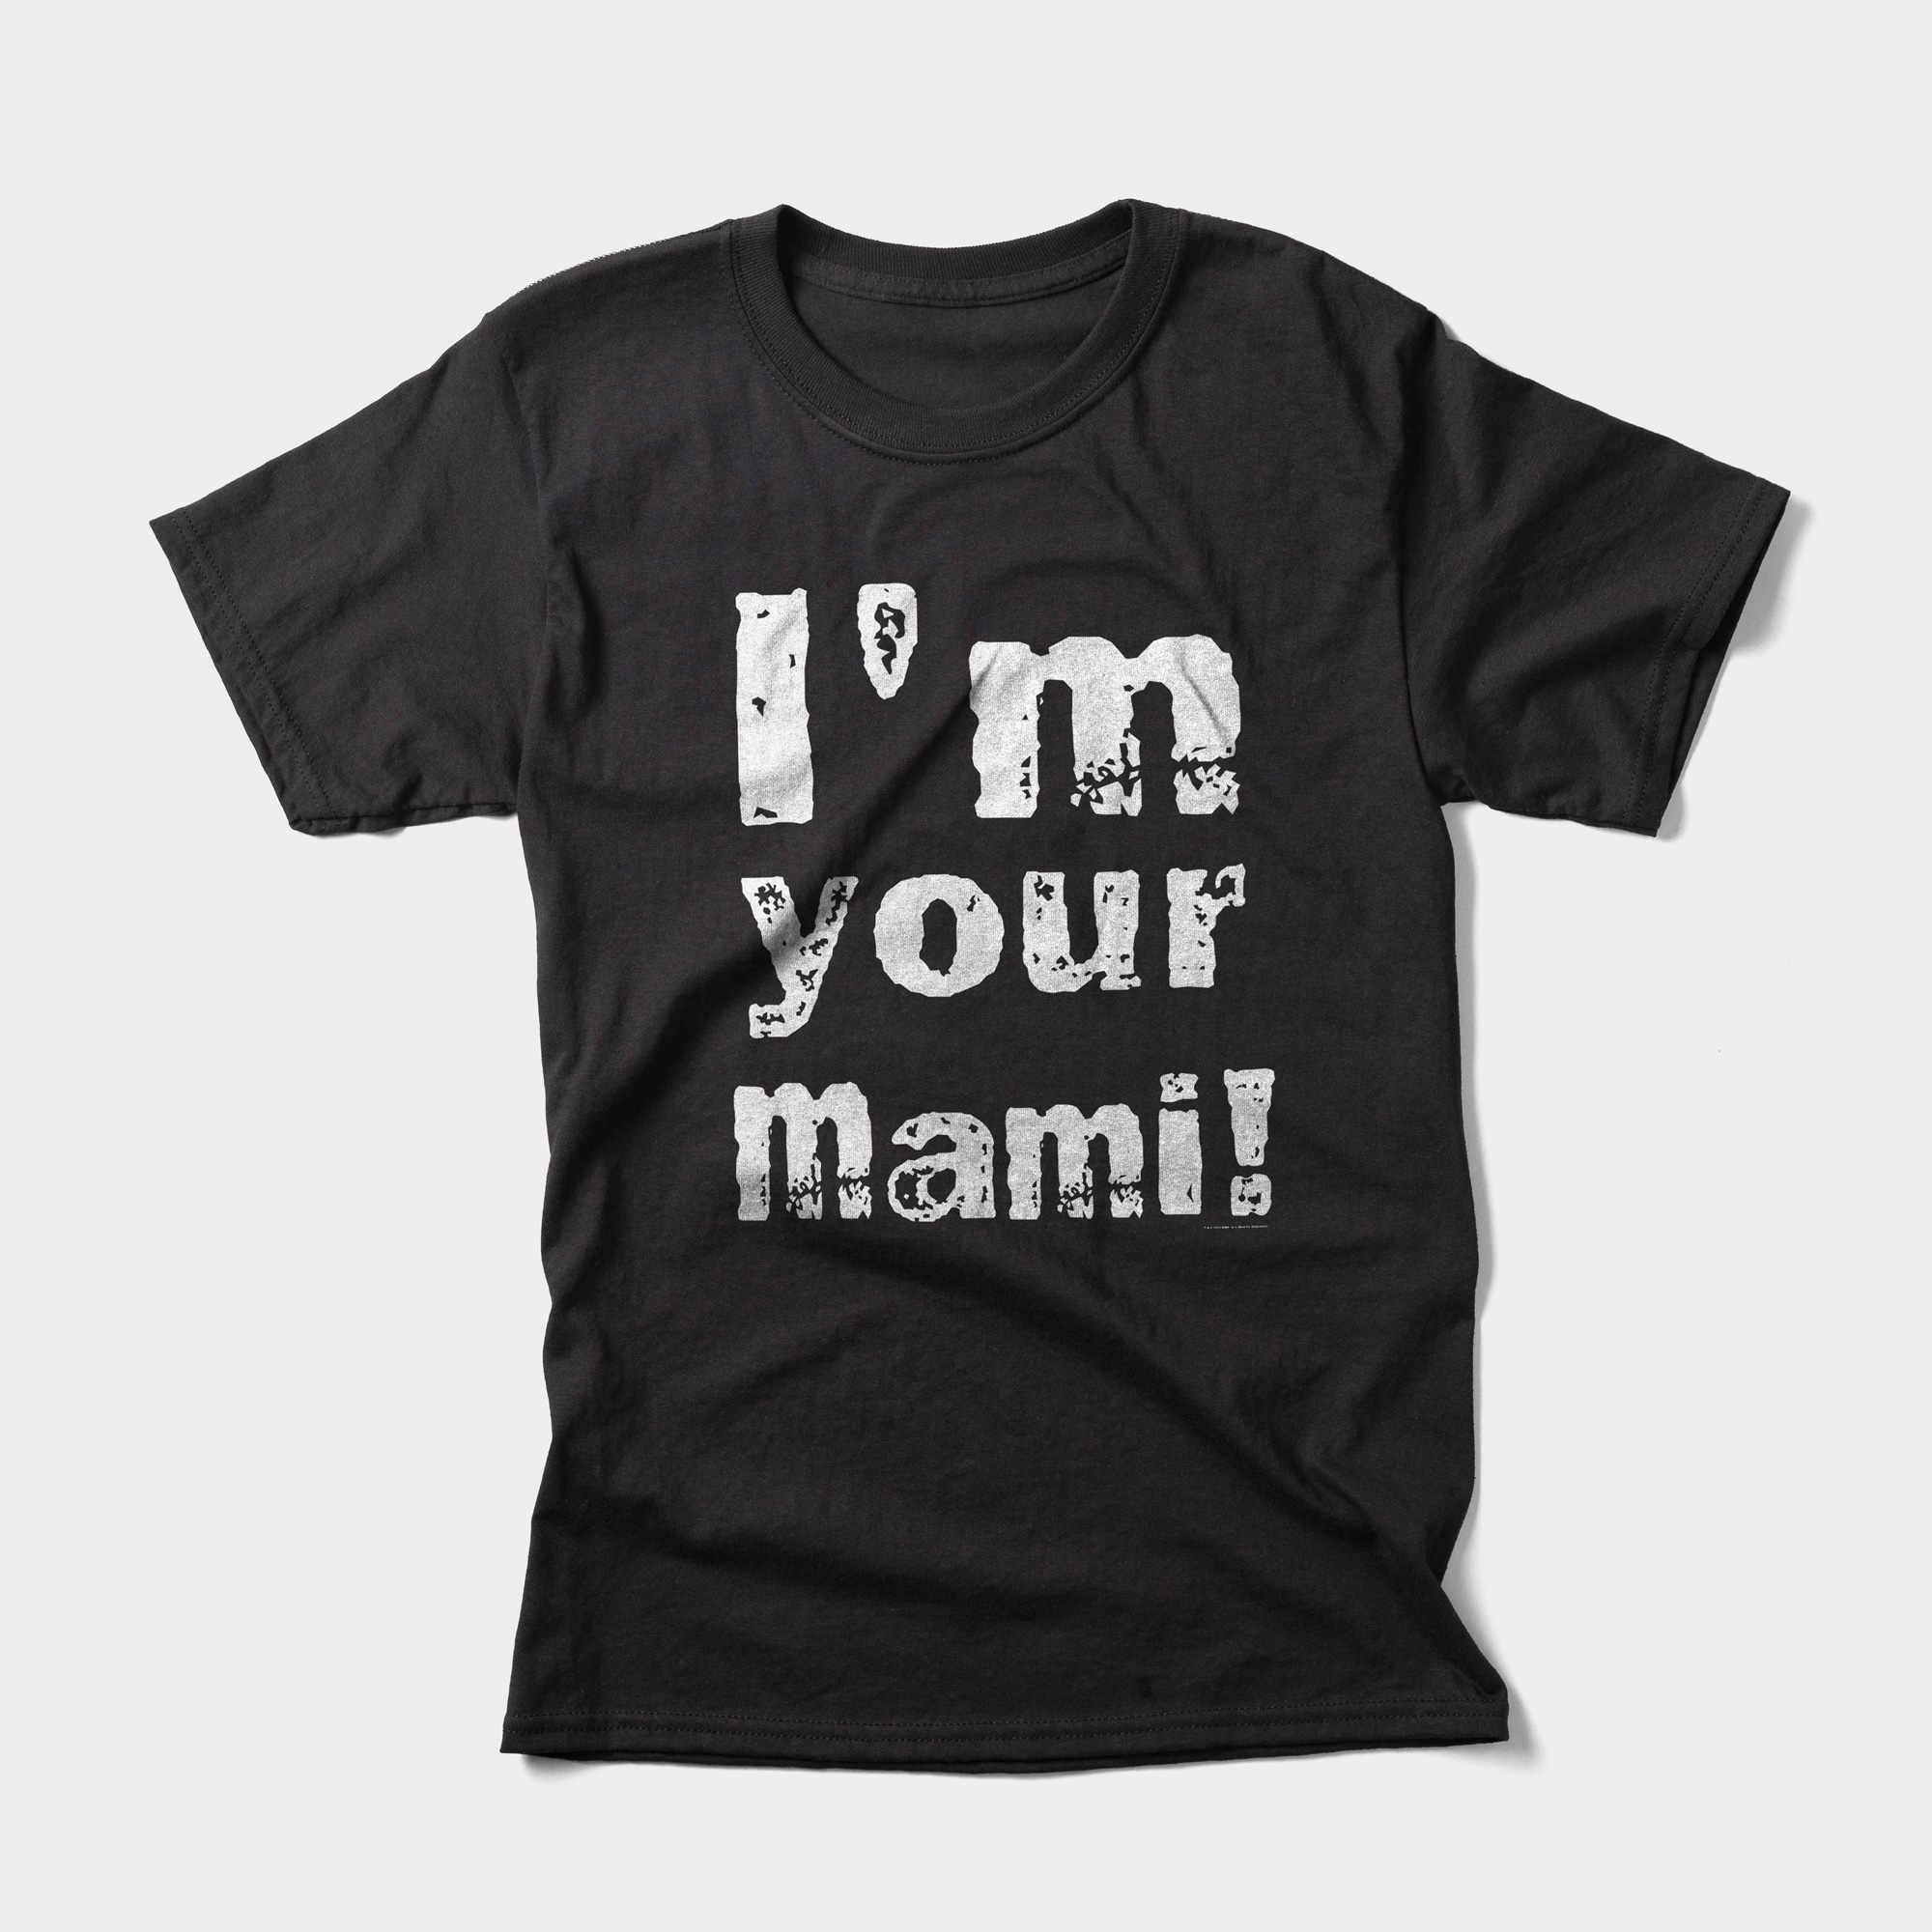 Rhea Ripley's "I'm Your Mami" shirt directly references Eddie Guerrero's shirt by using the same design. 